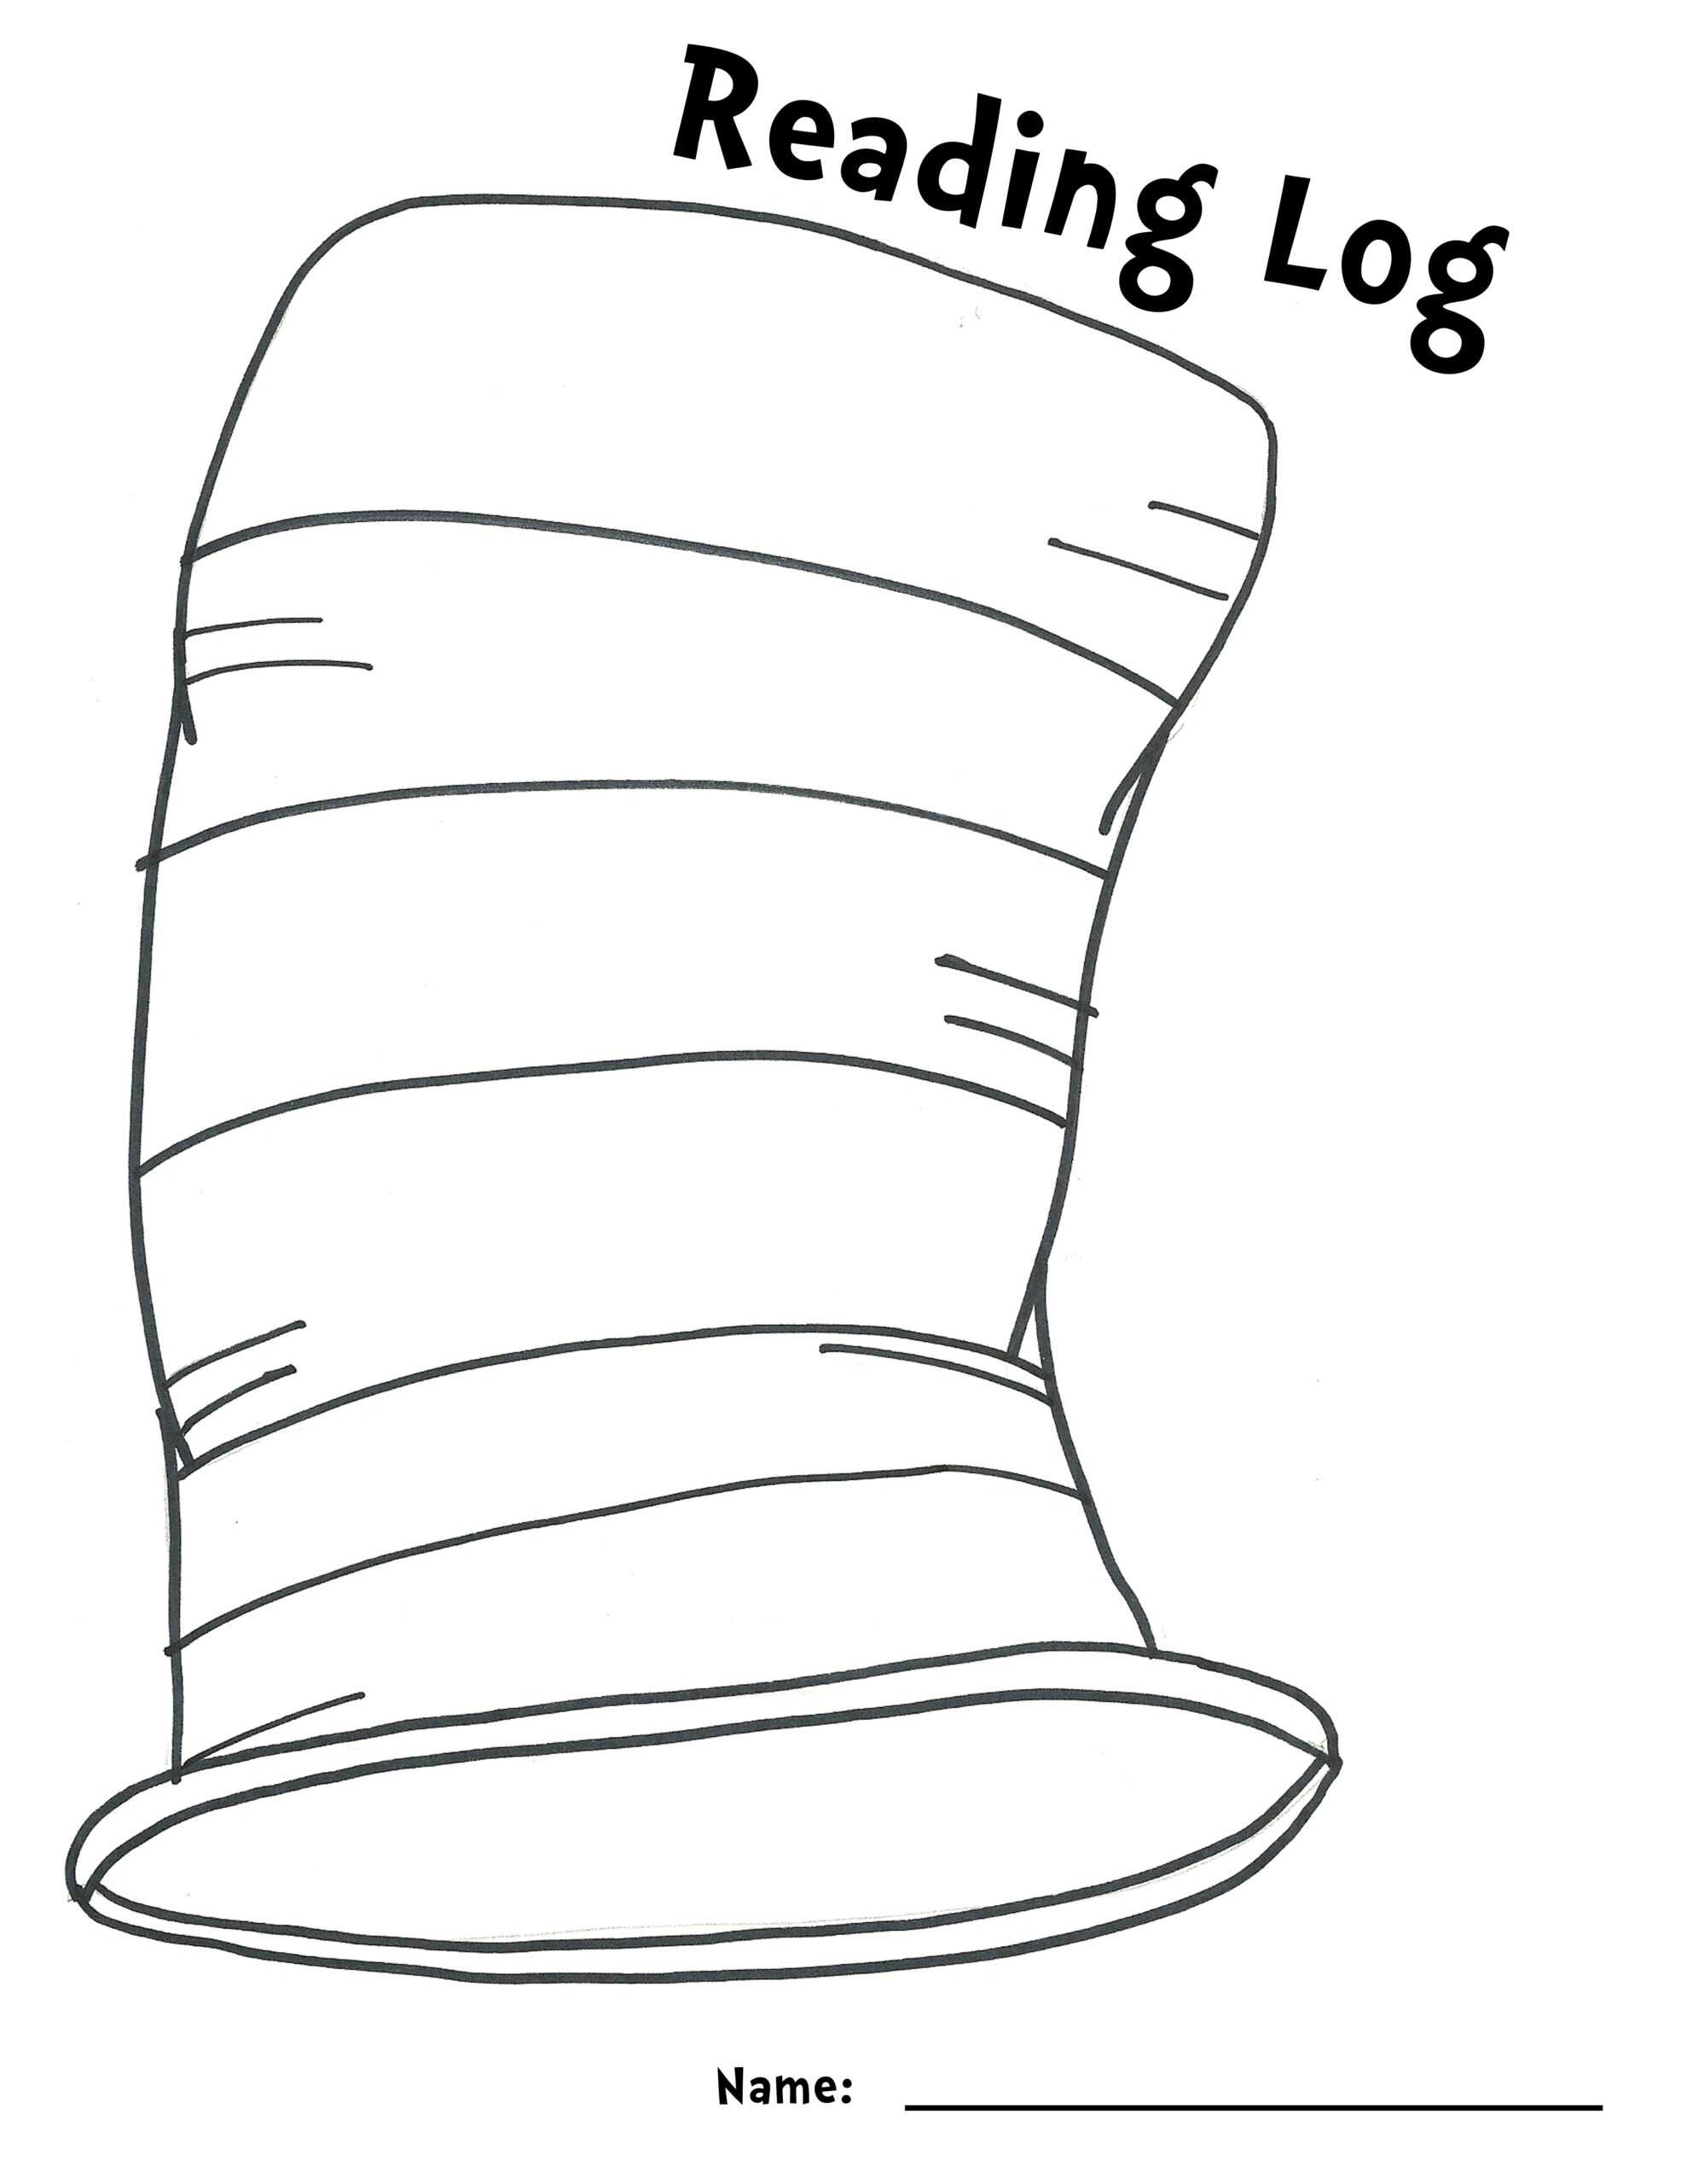 25 Images Of For Dr. Sue's Hat Template | Zeept Within Blank Cat In The Hat Template